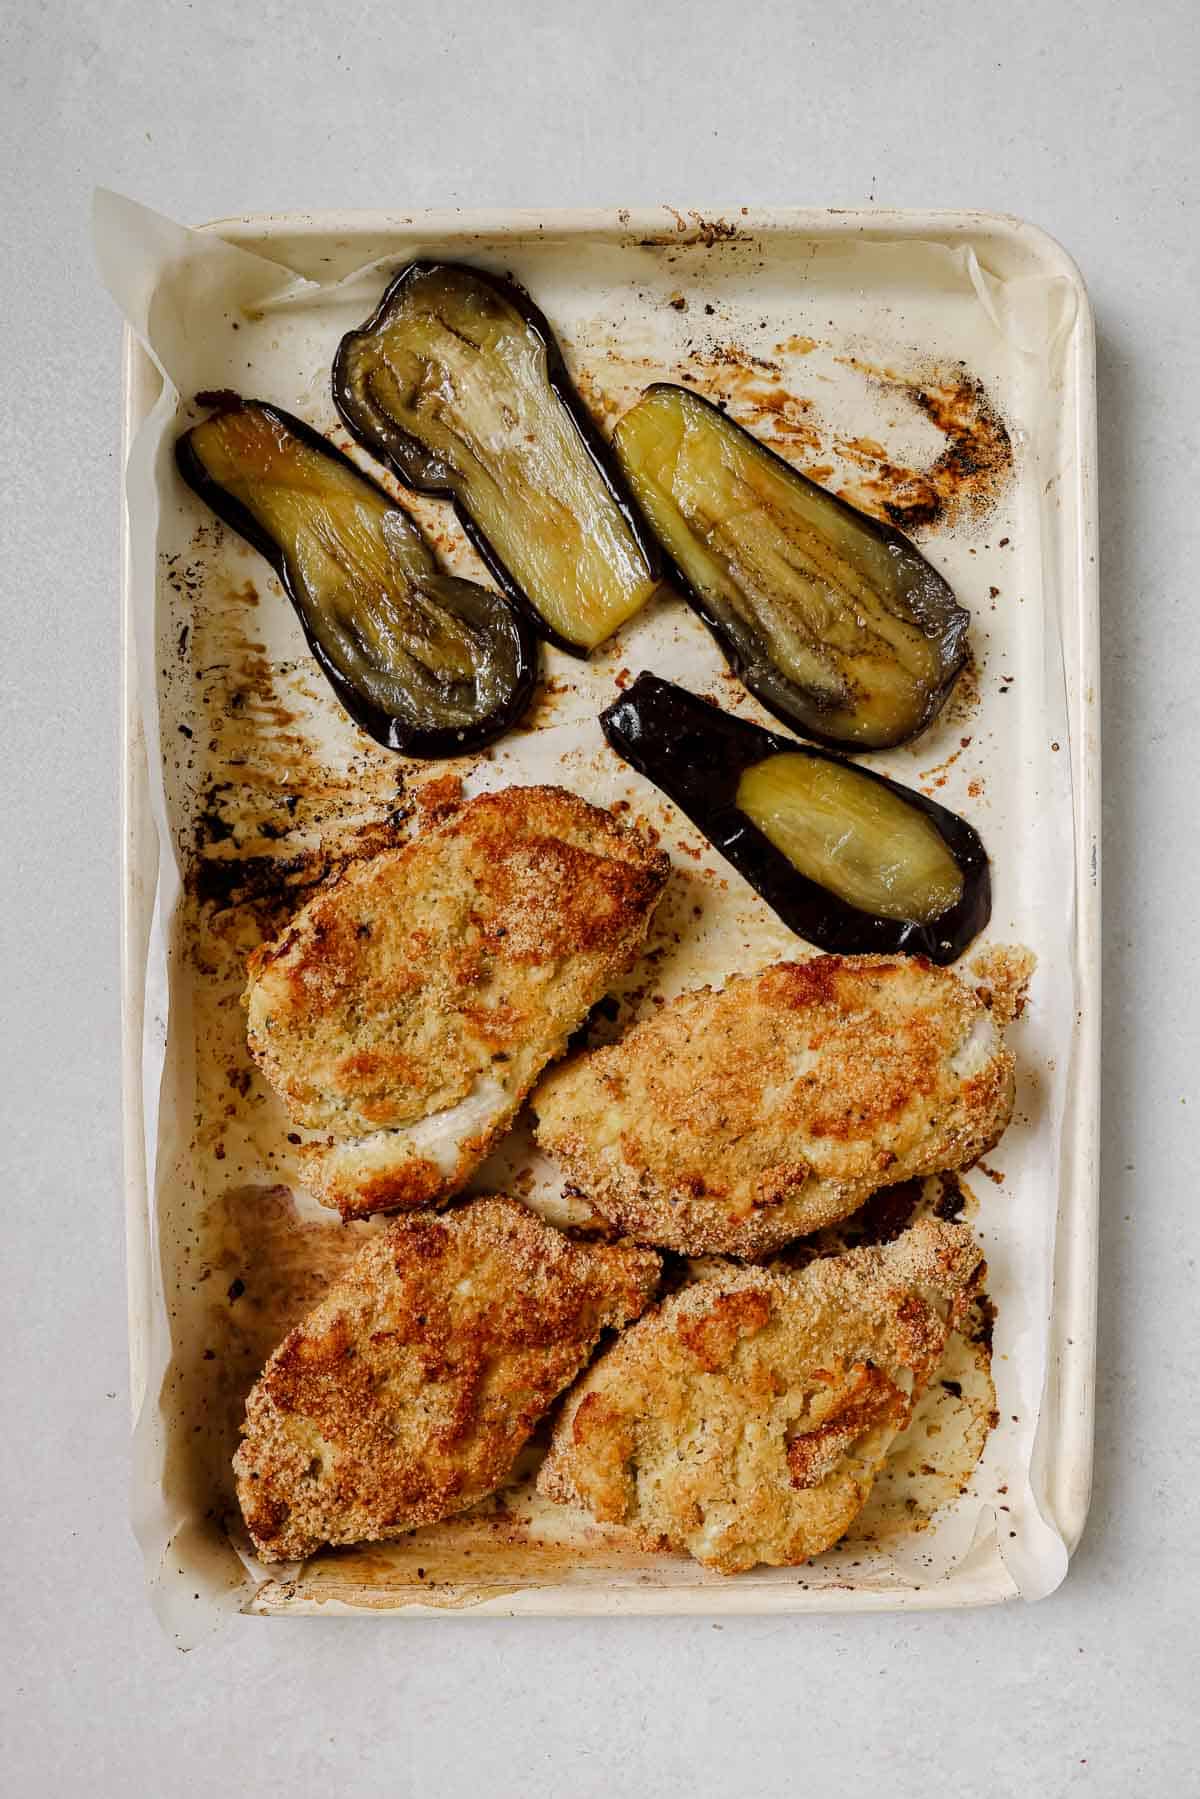 Roasted chicken and eggplant on a baking sheet.